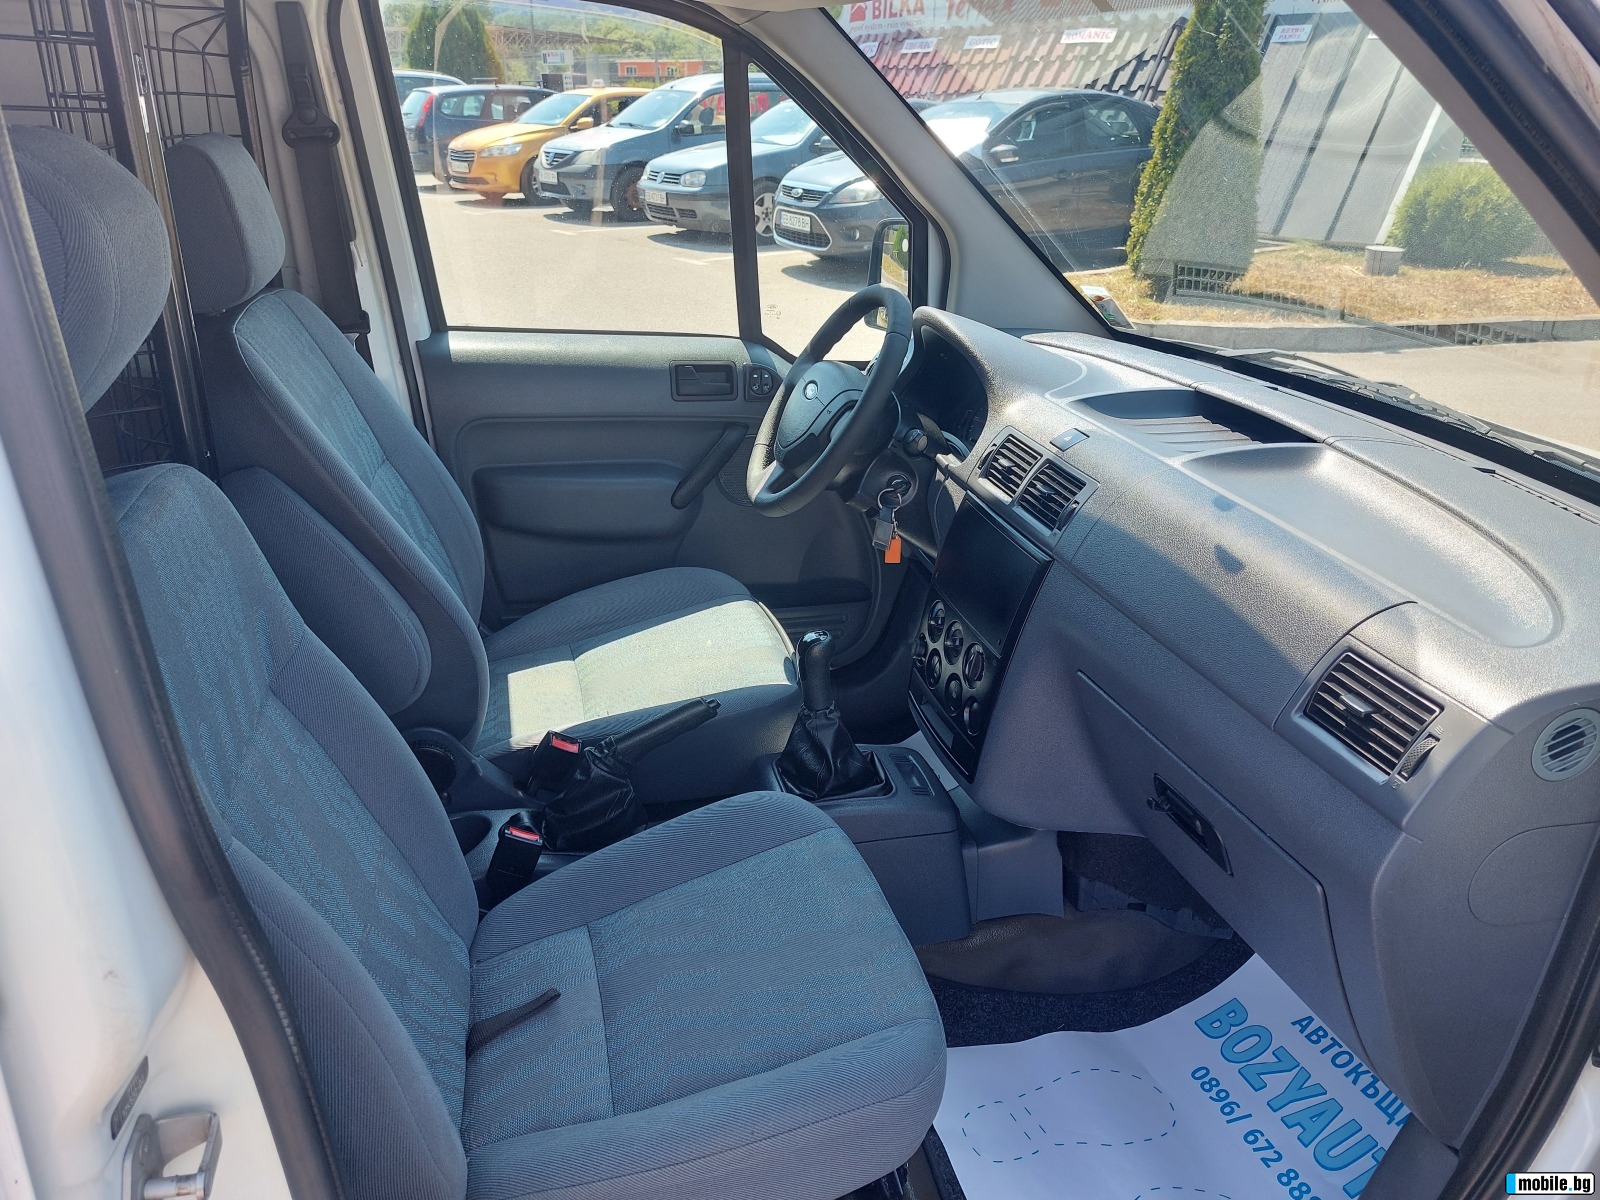 Ford Connect 1.8TDCi/90ps | Mobile.bg   8